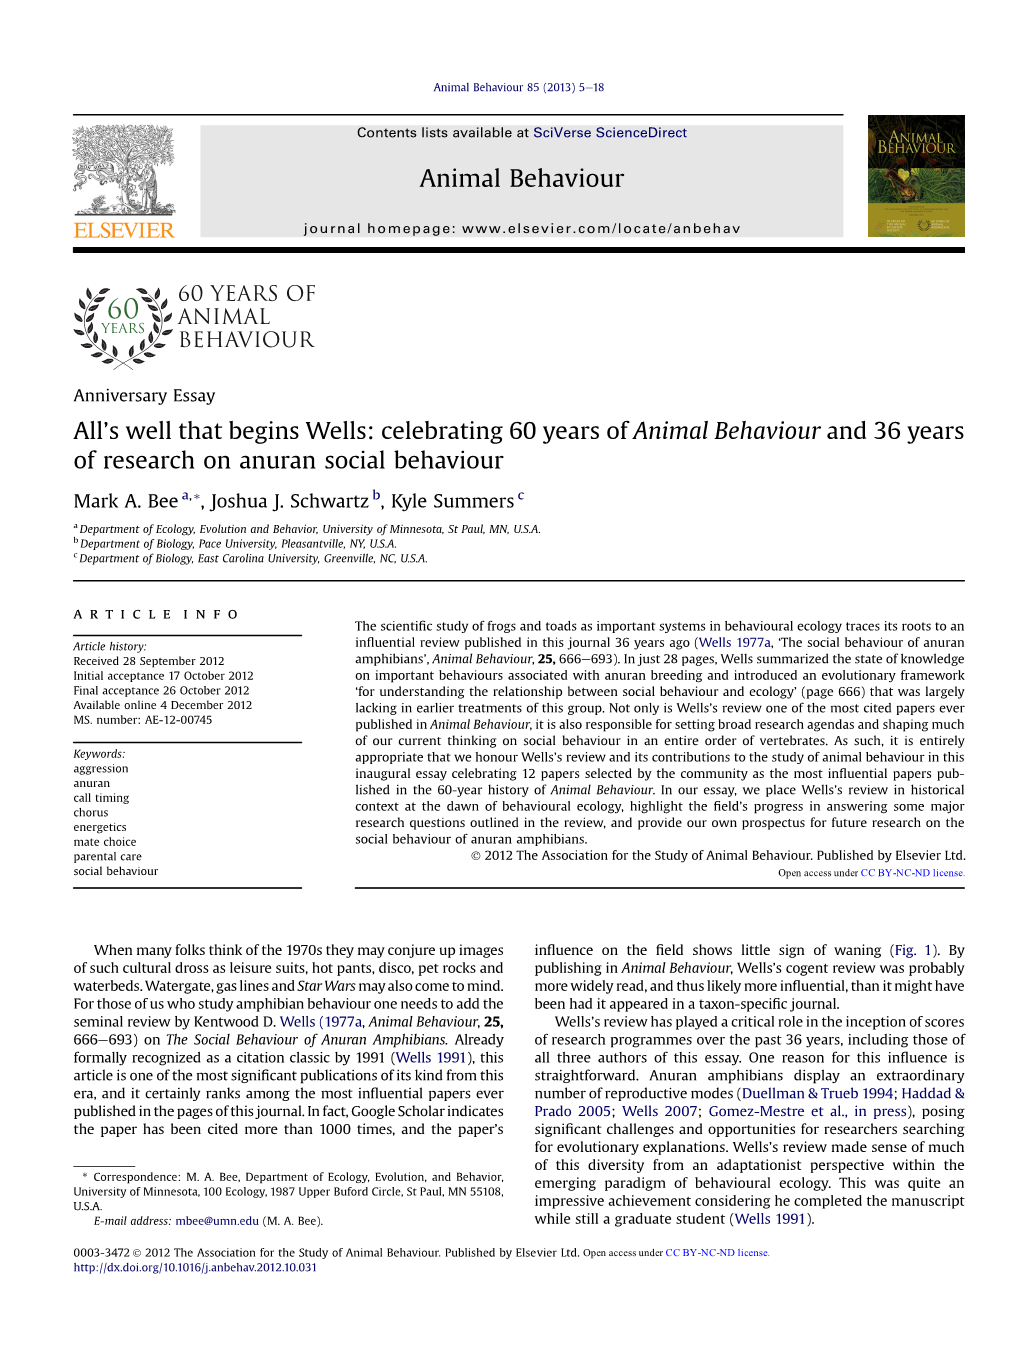 Celebrating 60 Years of Animal Behaviour and 36 Years of Research on Anuran Social Behaviour